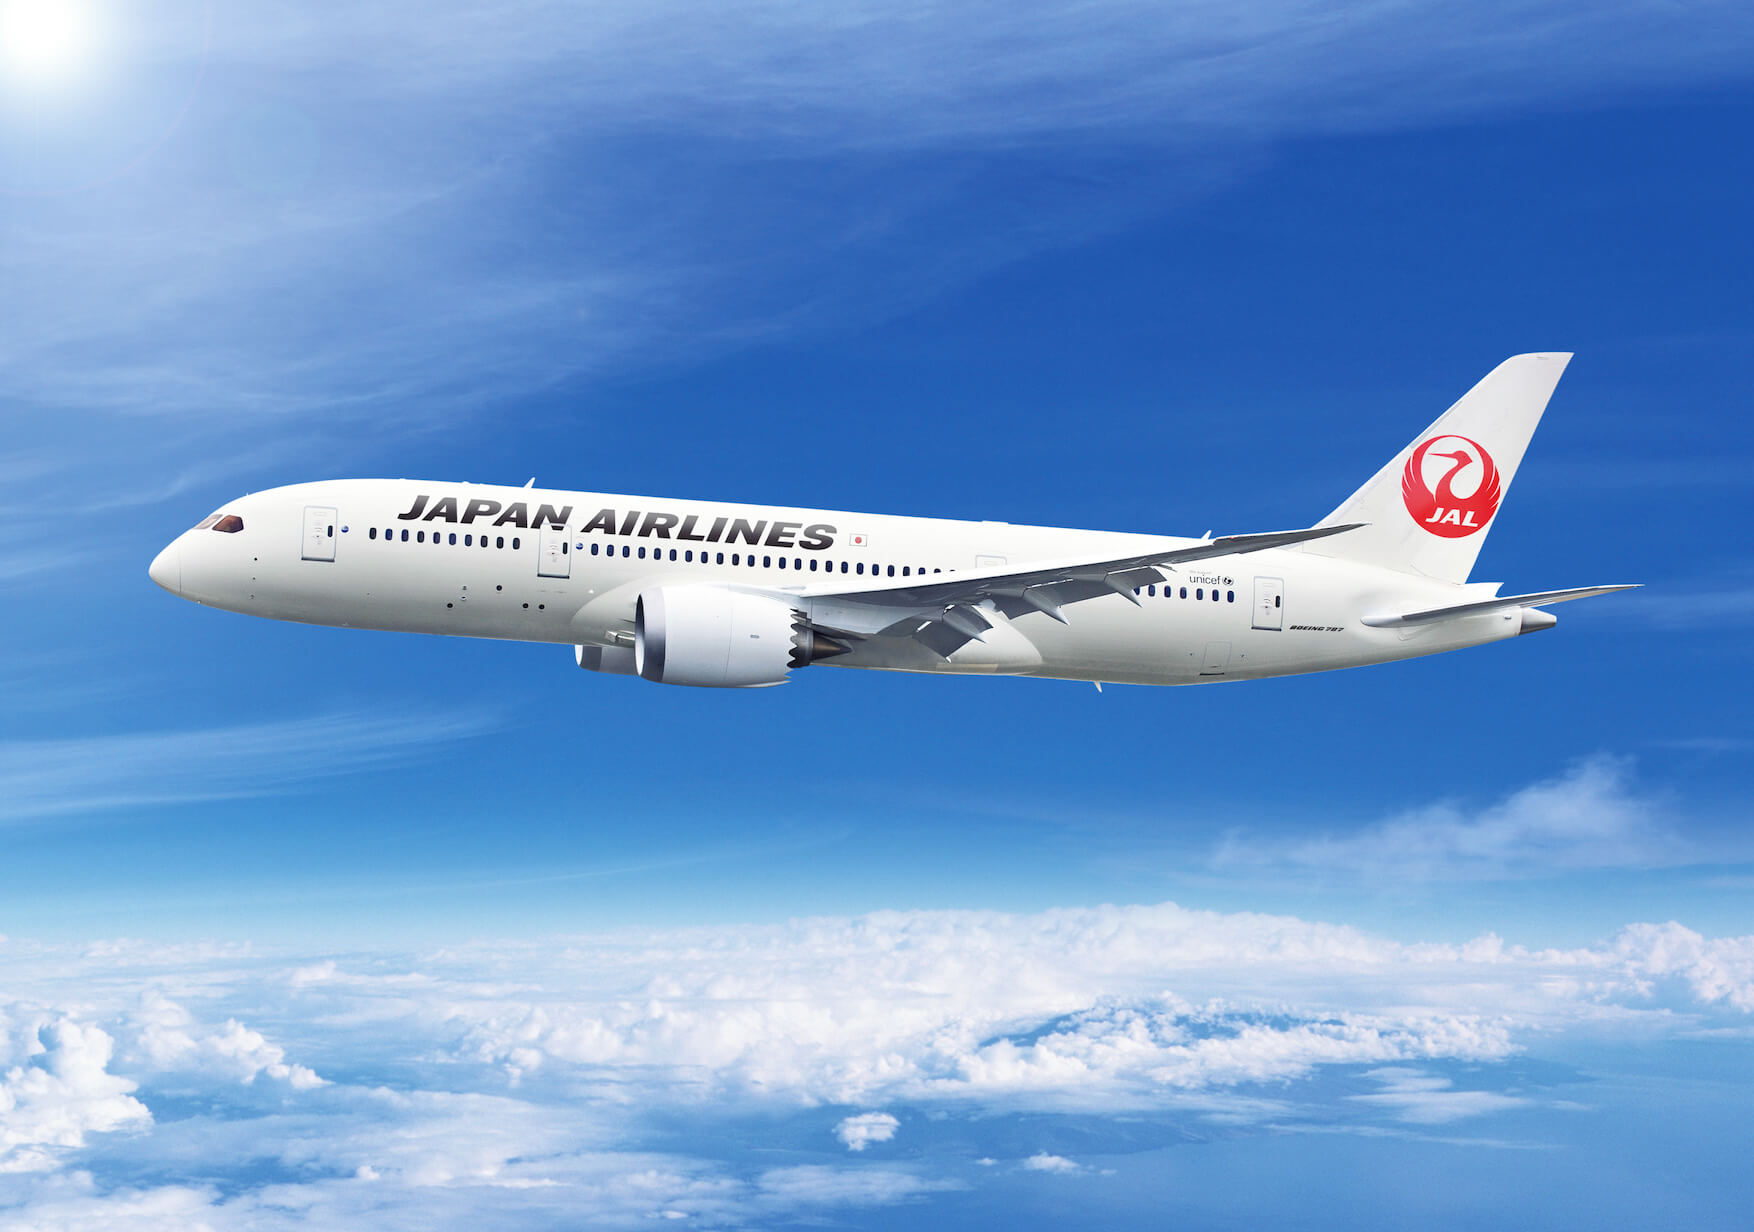 Japan Airlines' Boeing 787 aircraft